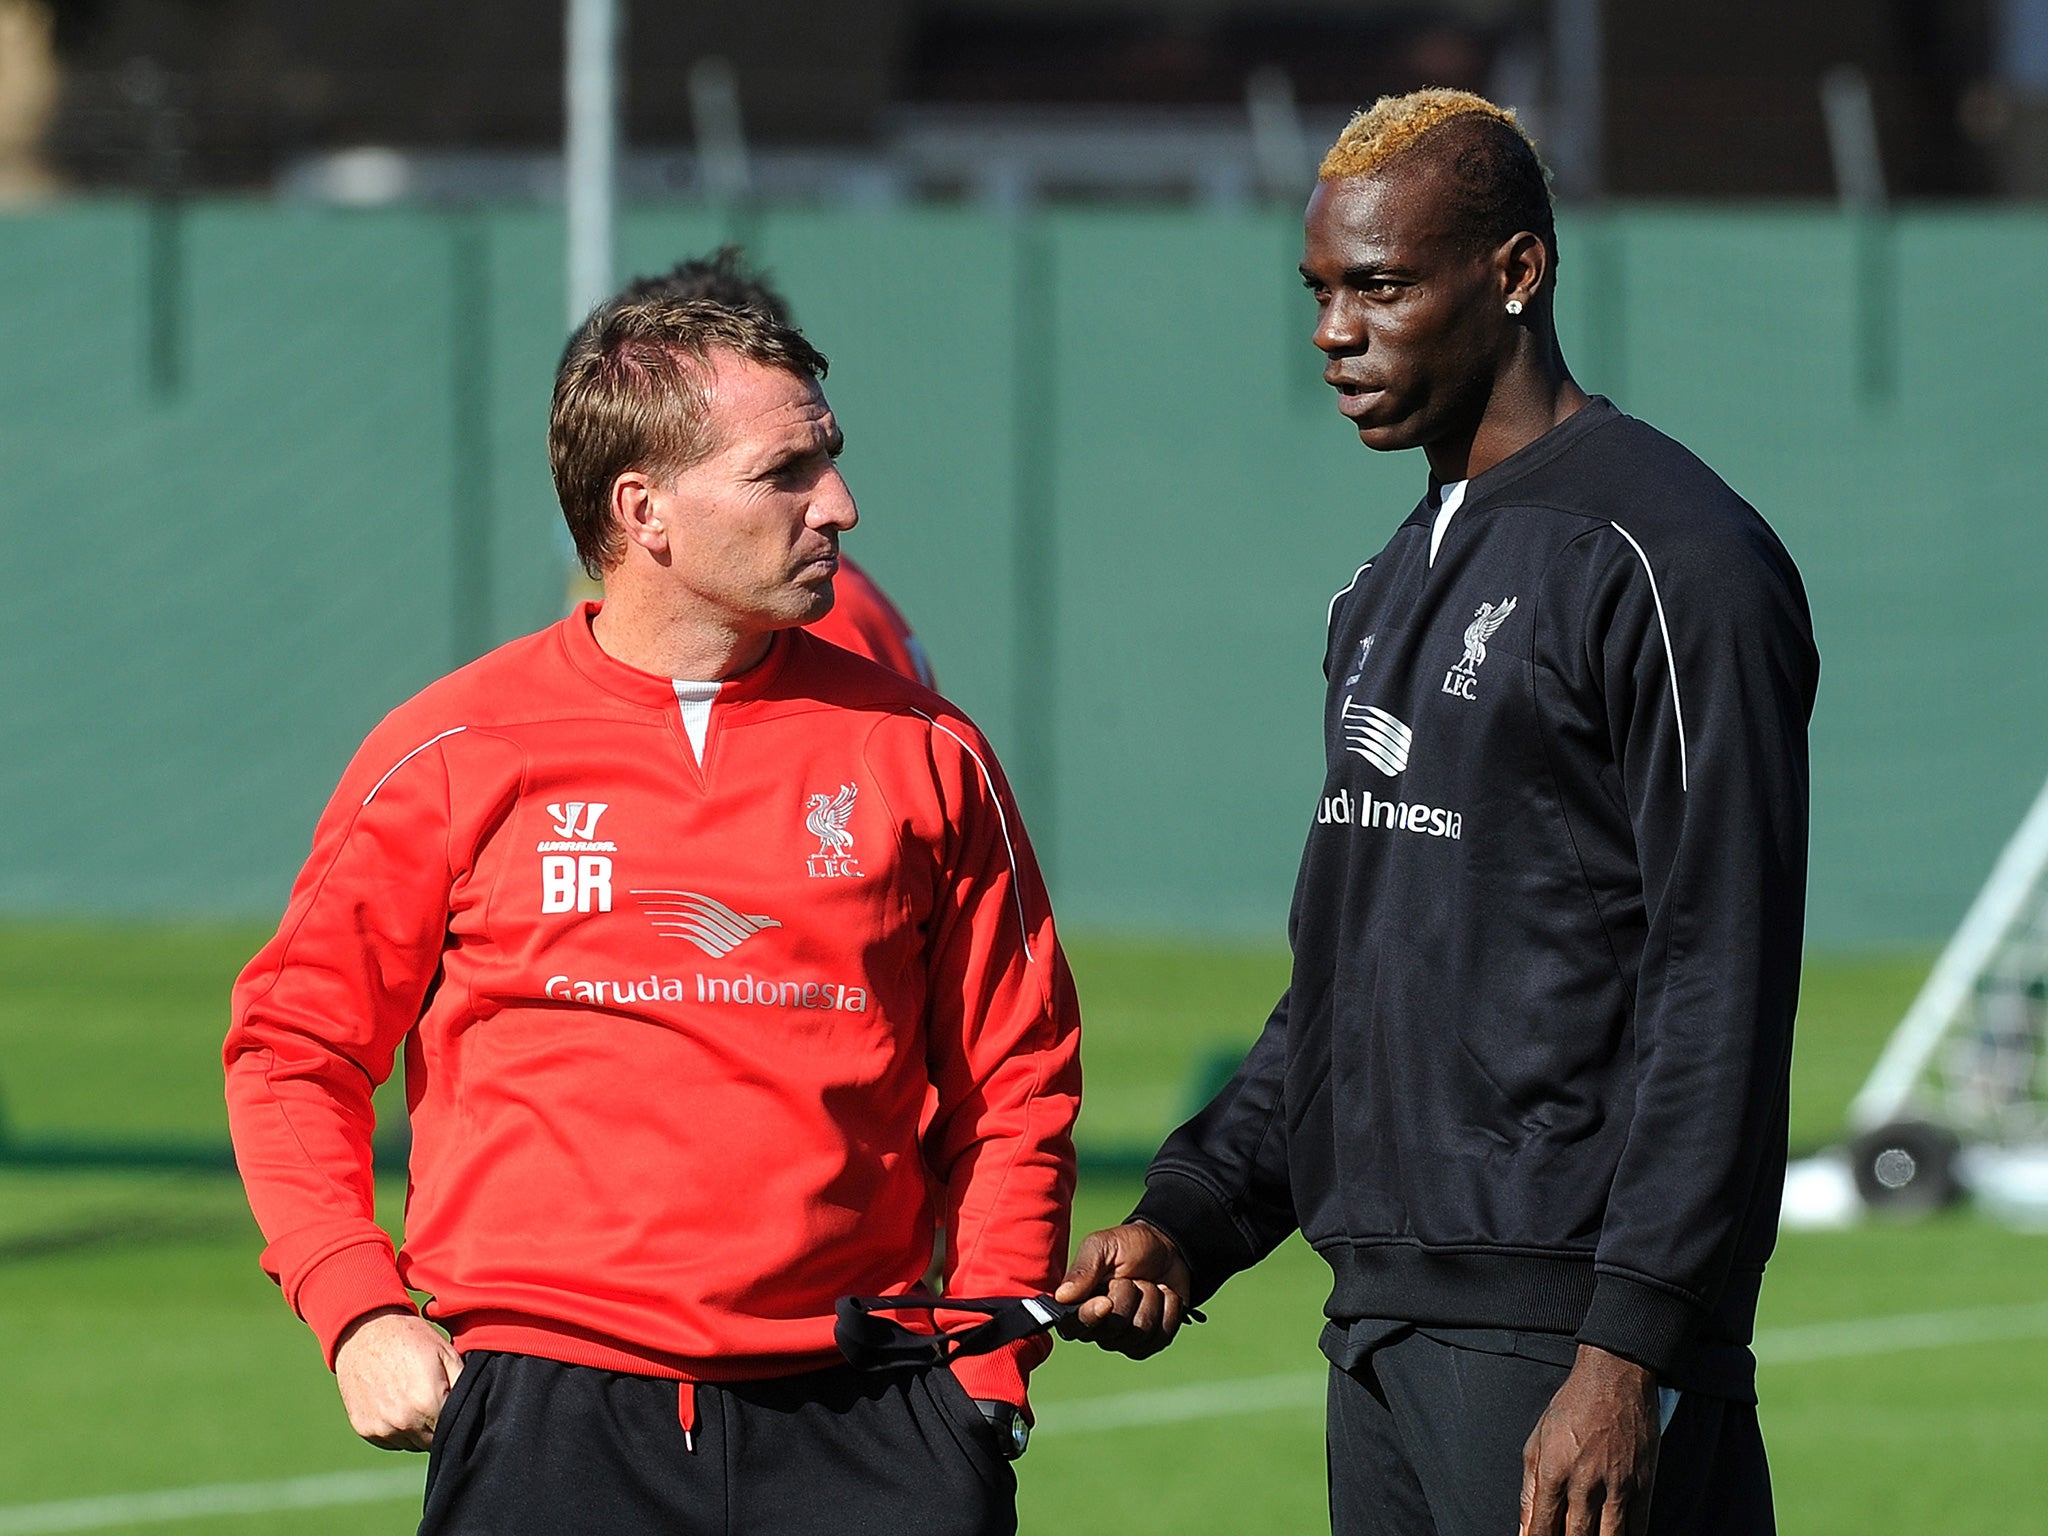 Rodgers admits he failed to 'connect' with Balotelli at Liverpool